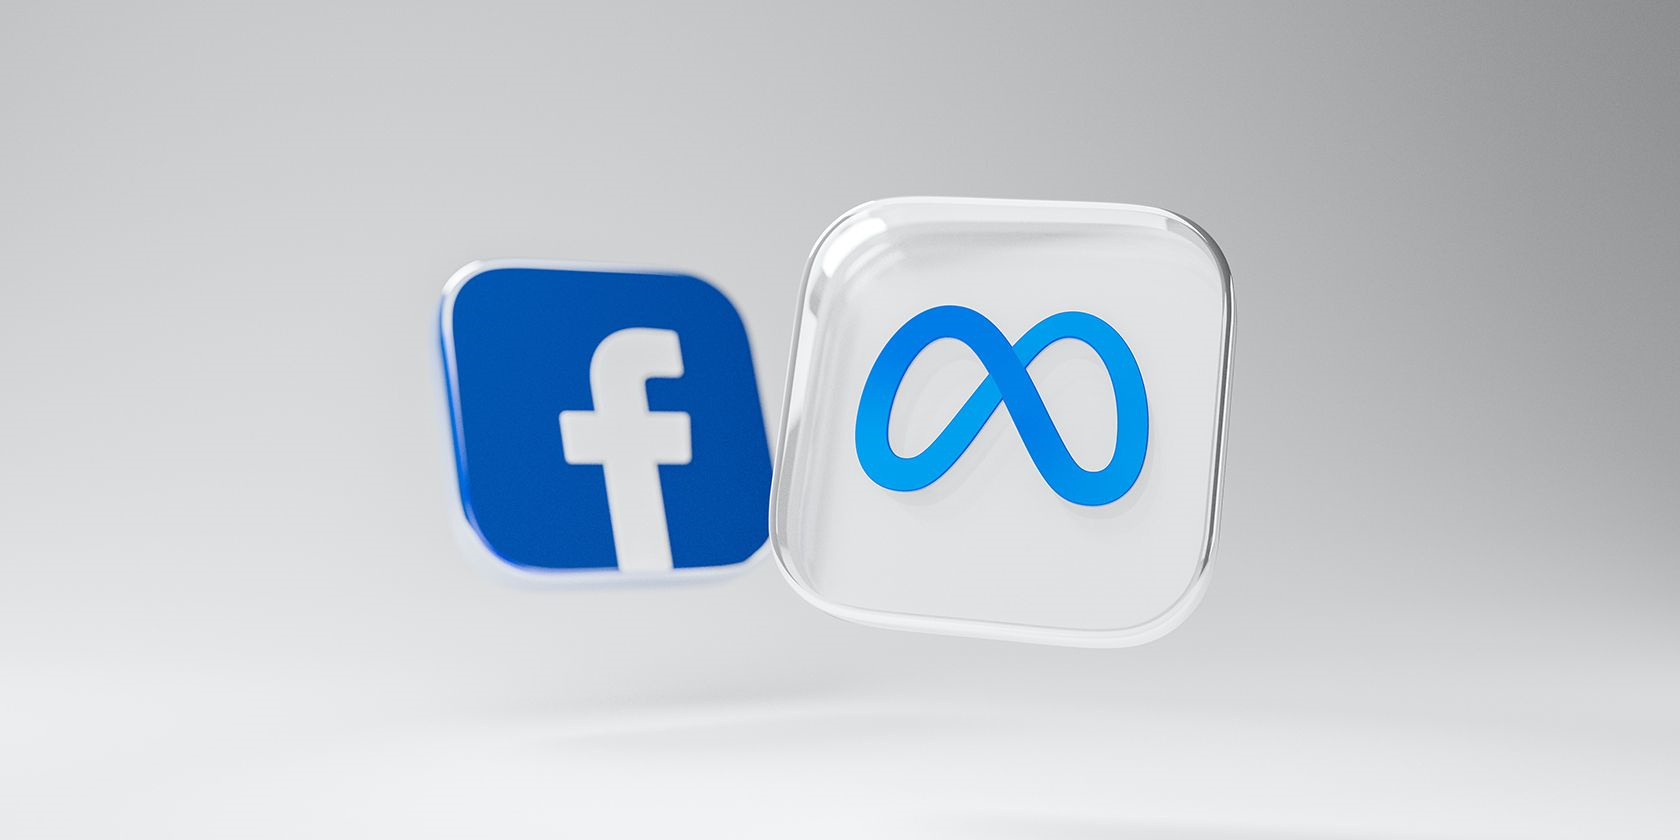 facebook symbol meanings explained and how to use them properly